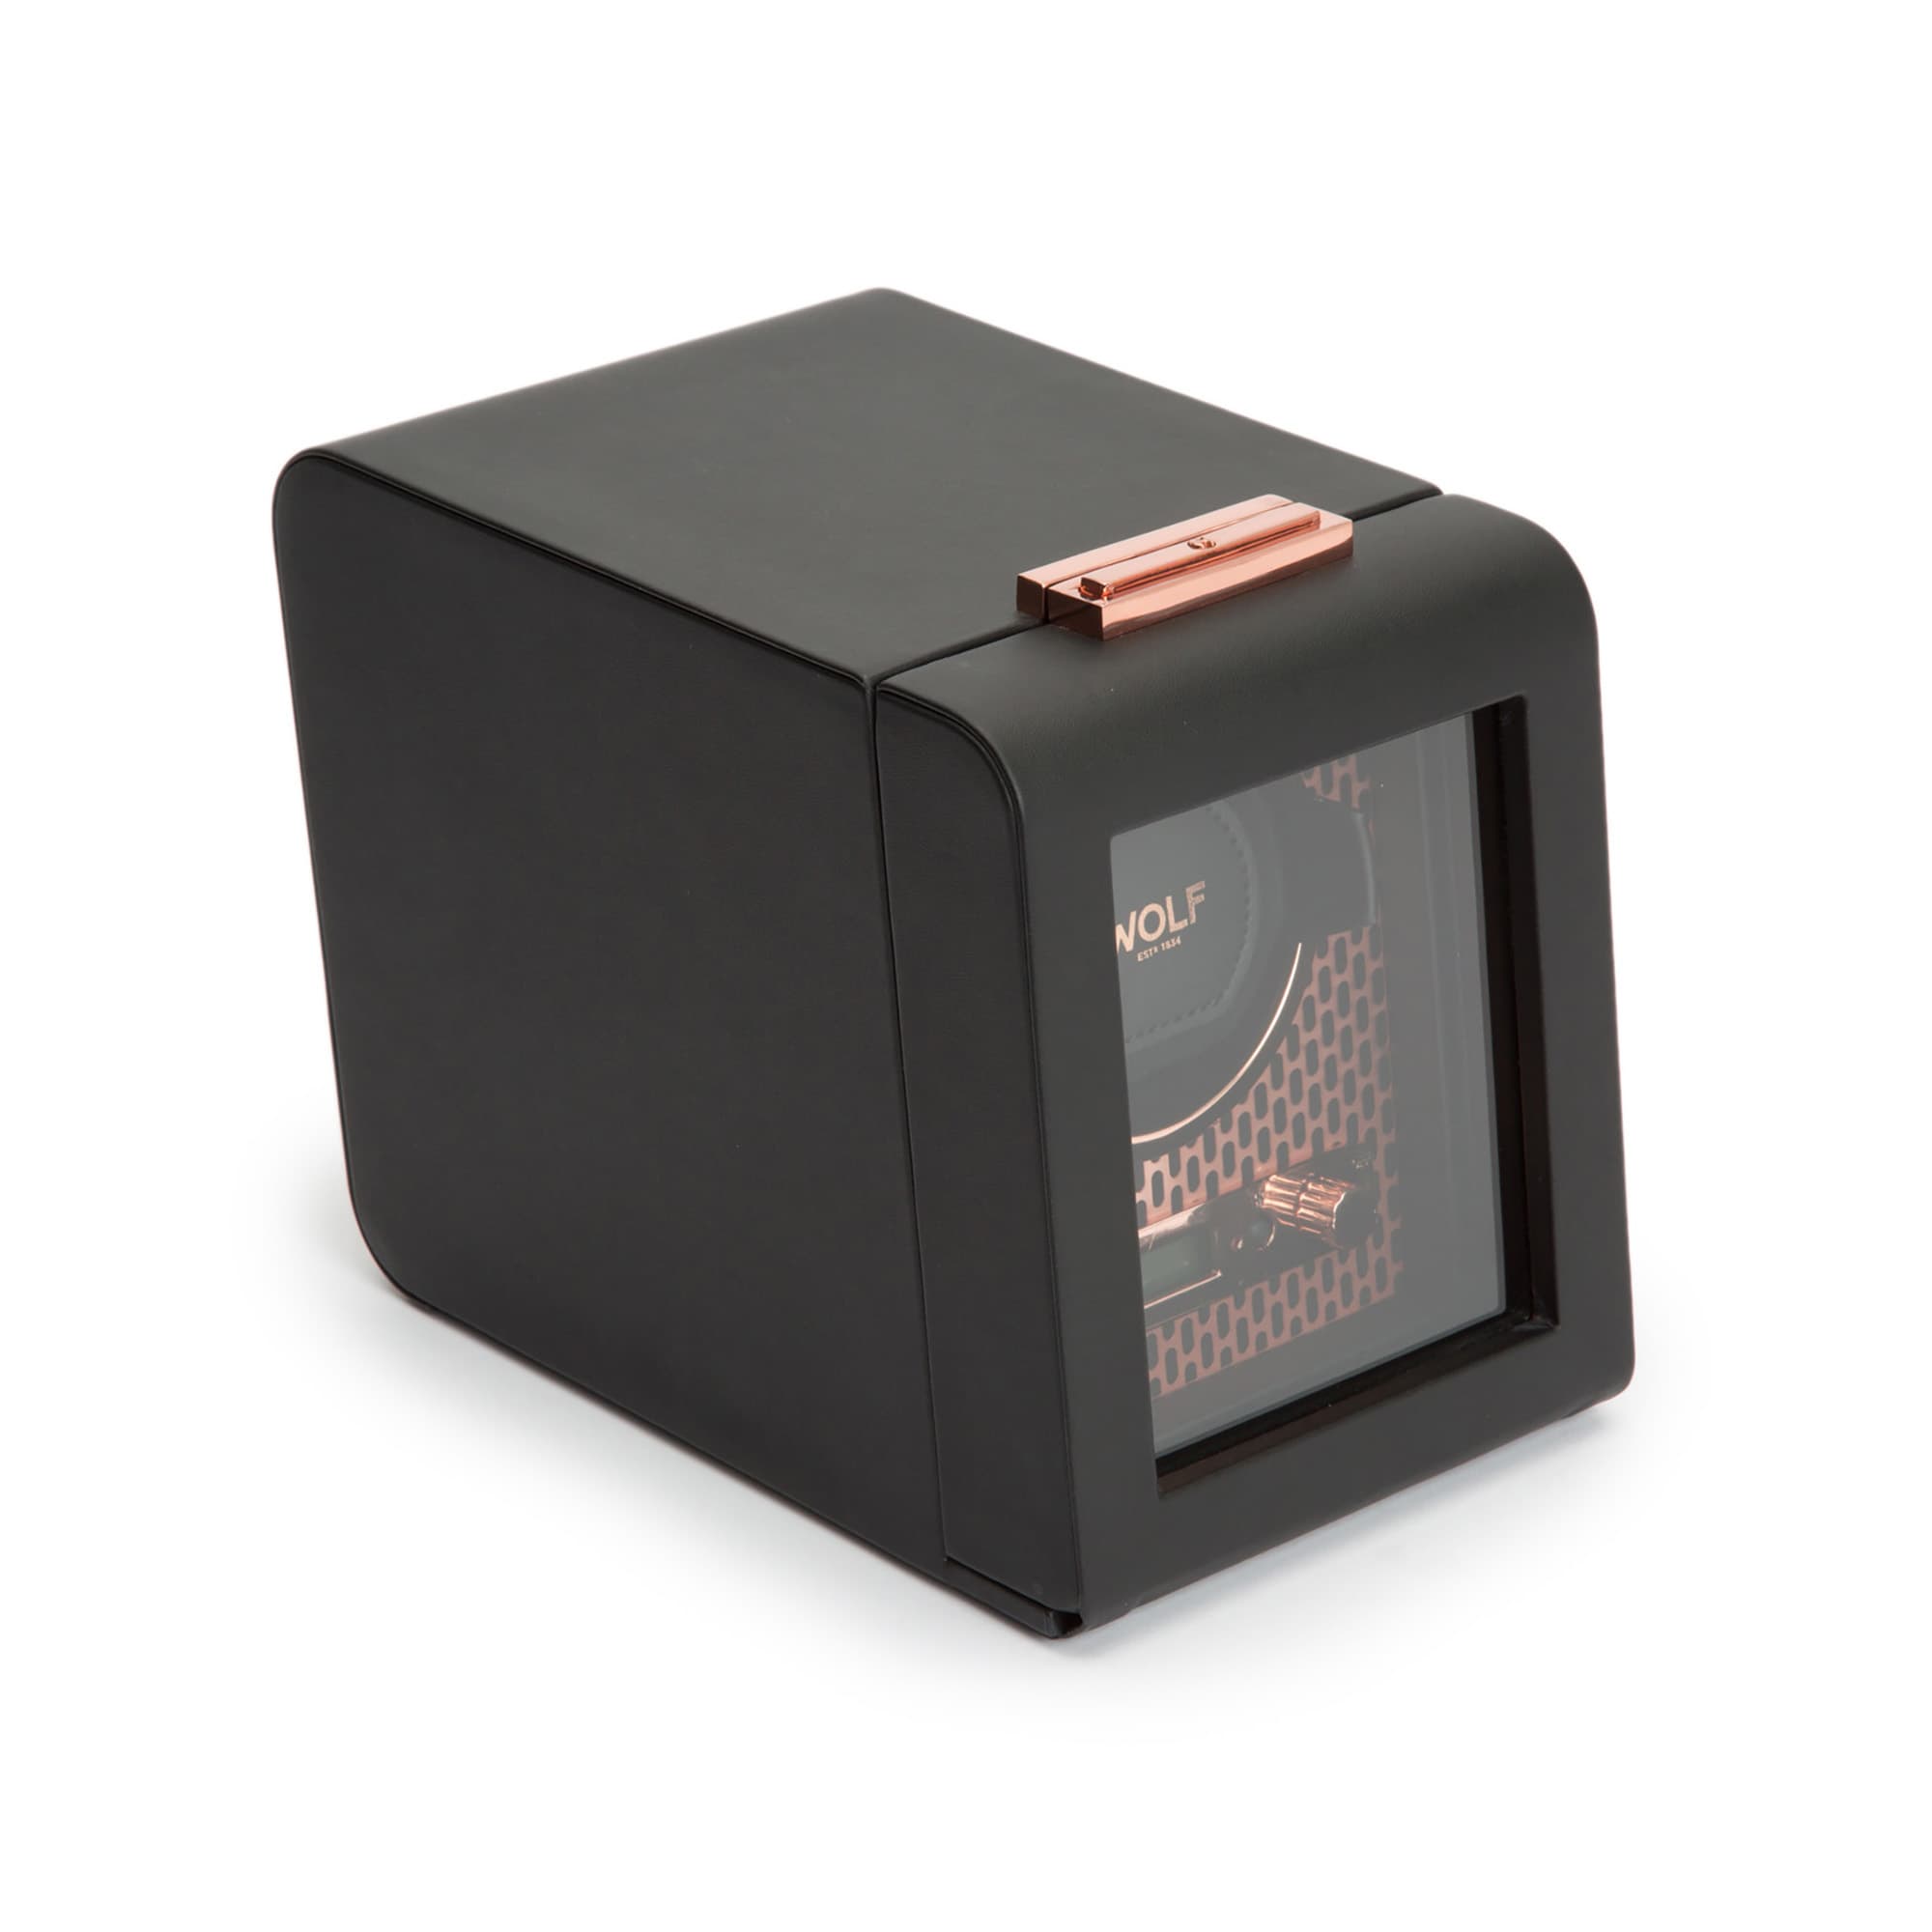 Wolf-Axis-Single-Watch-Winder-Copper-469116-1